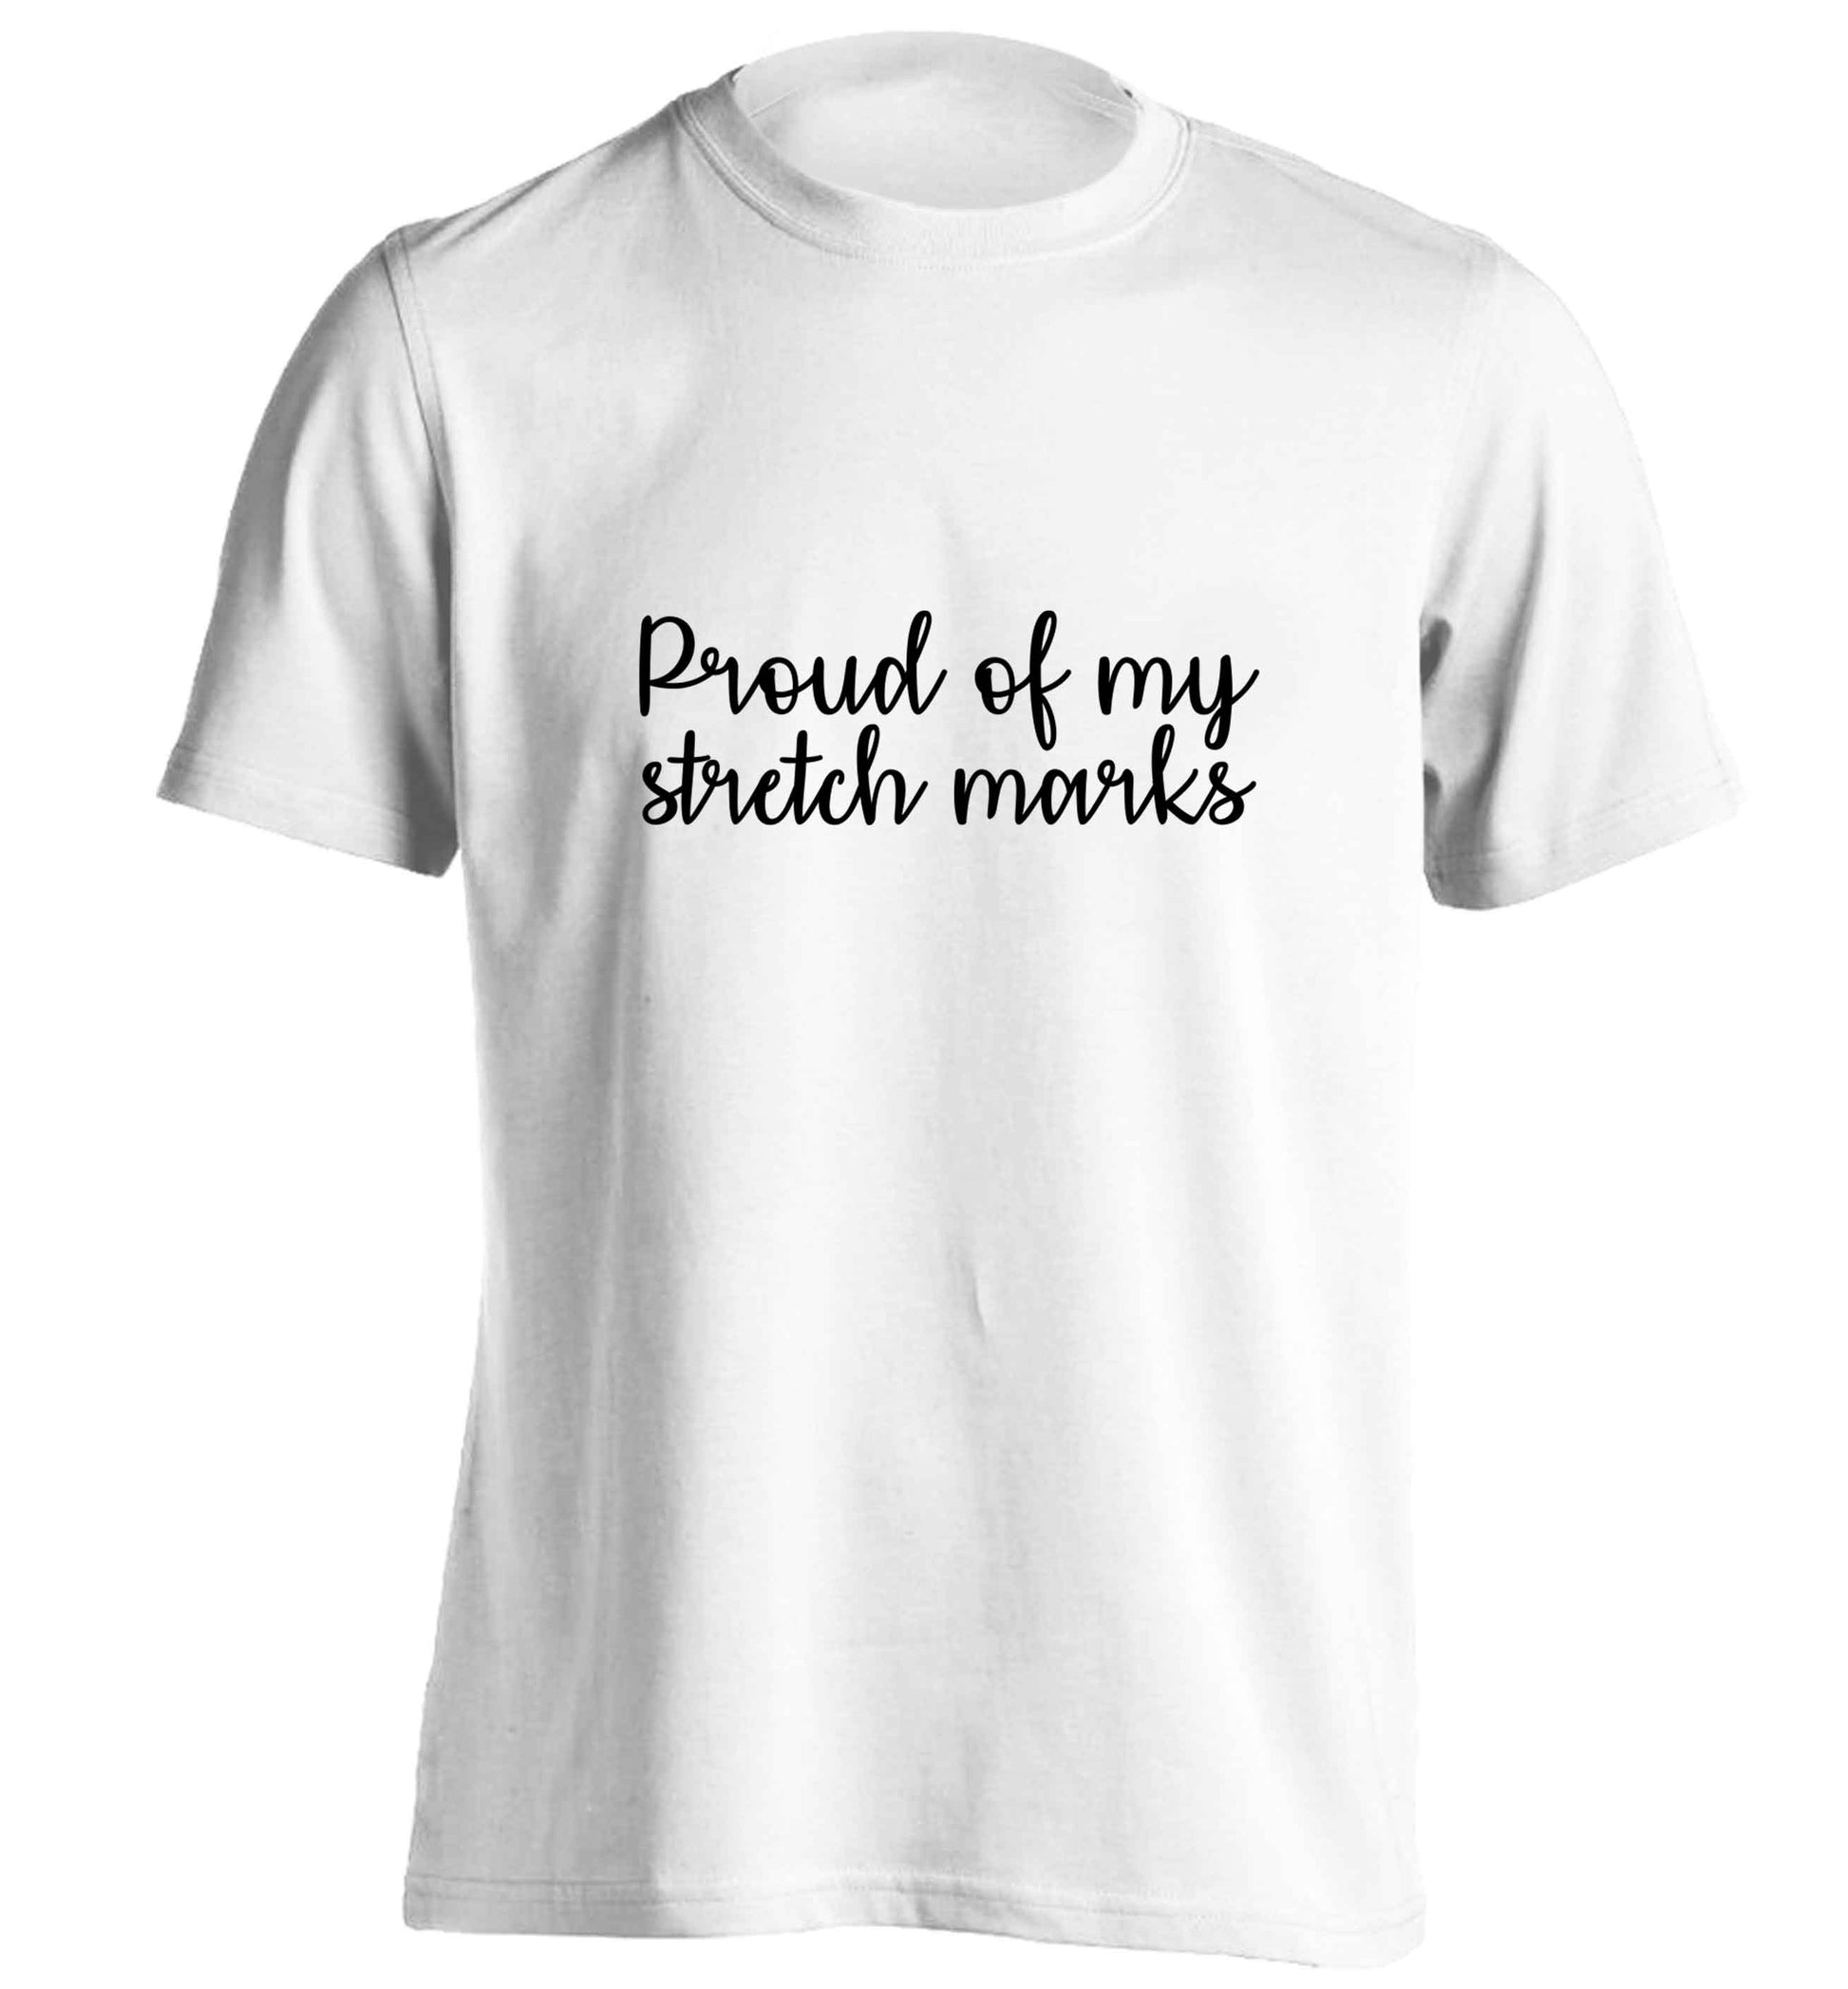 Proud of my stretch marks adults unisex white Tshirt 2XL